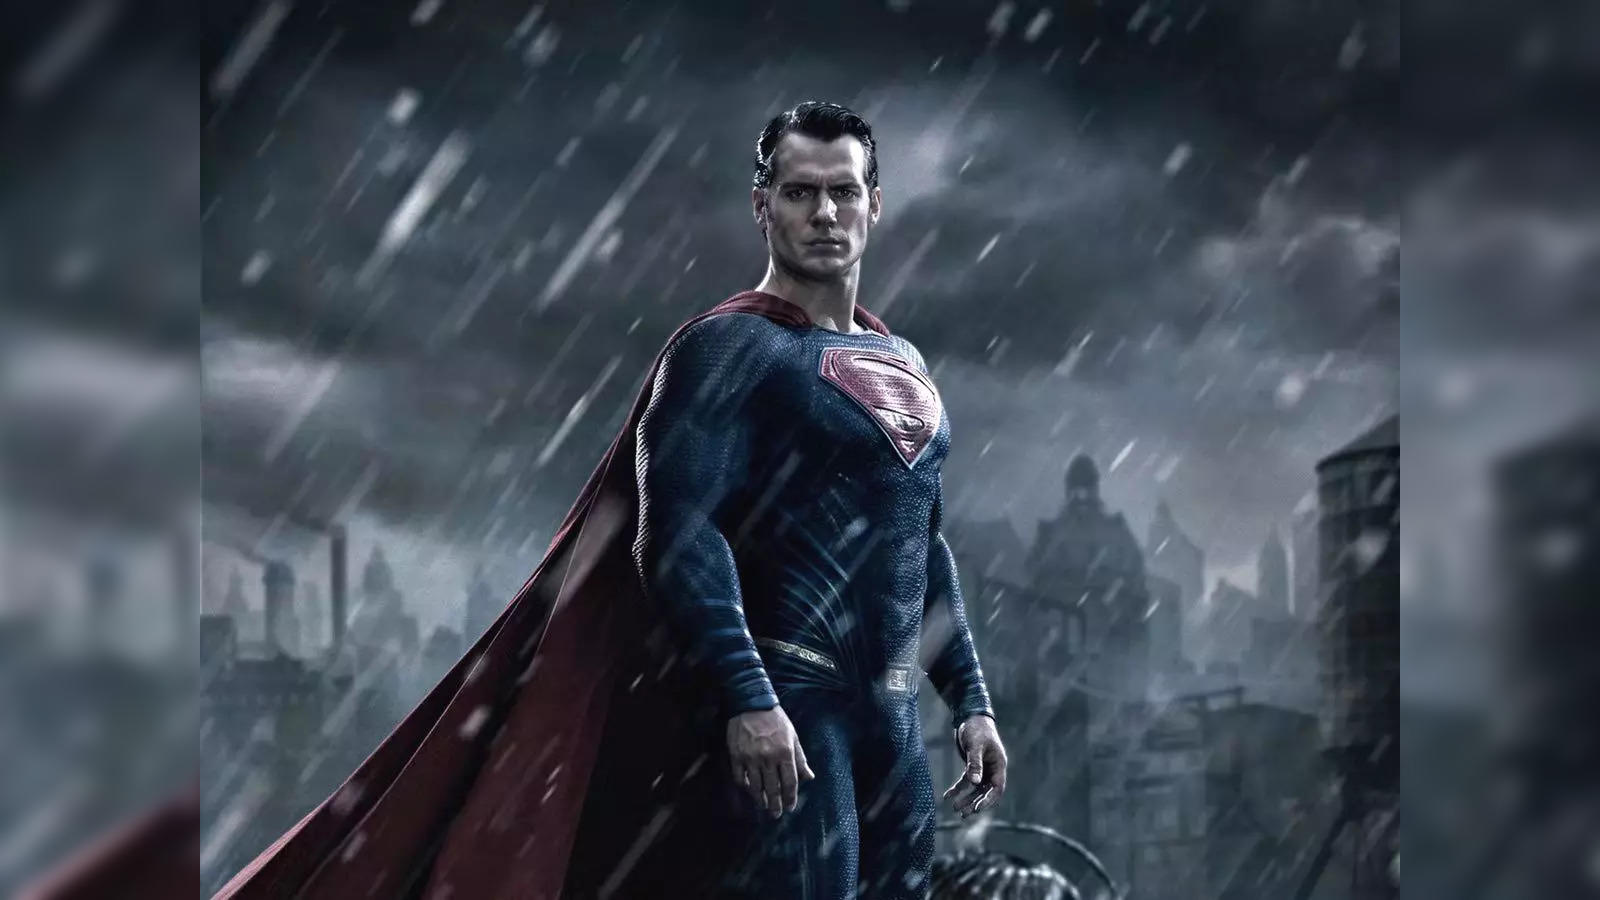 Henry Cavill will no longer be playing Superman in DC movies